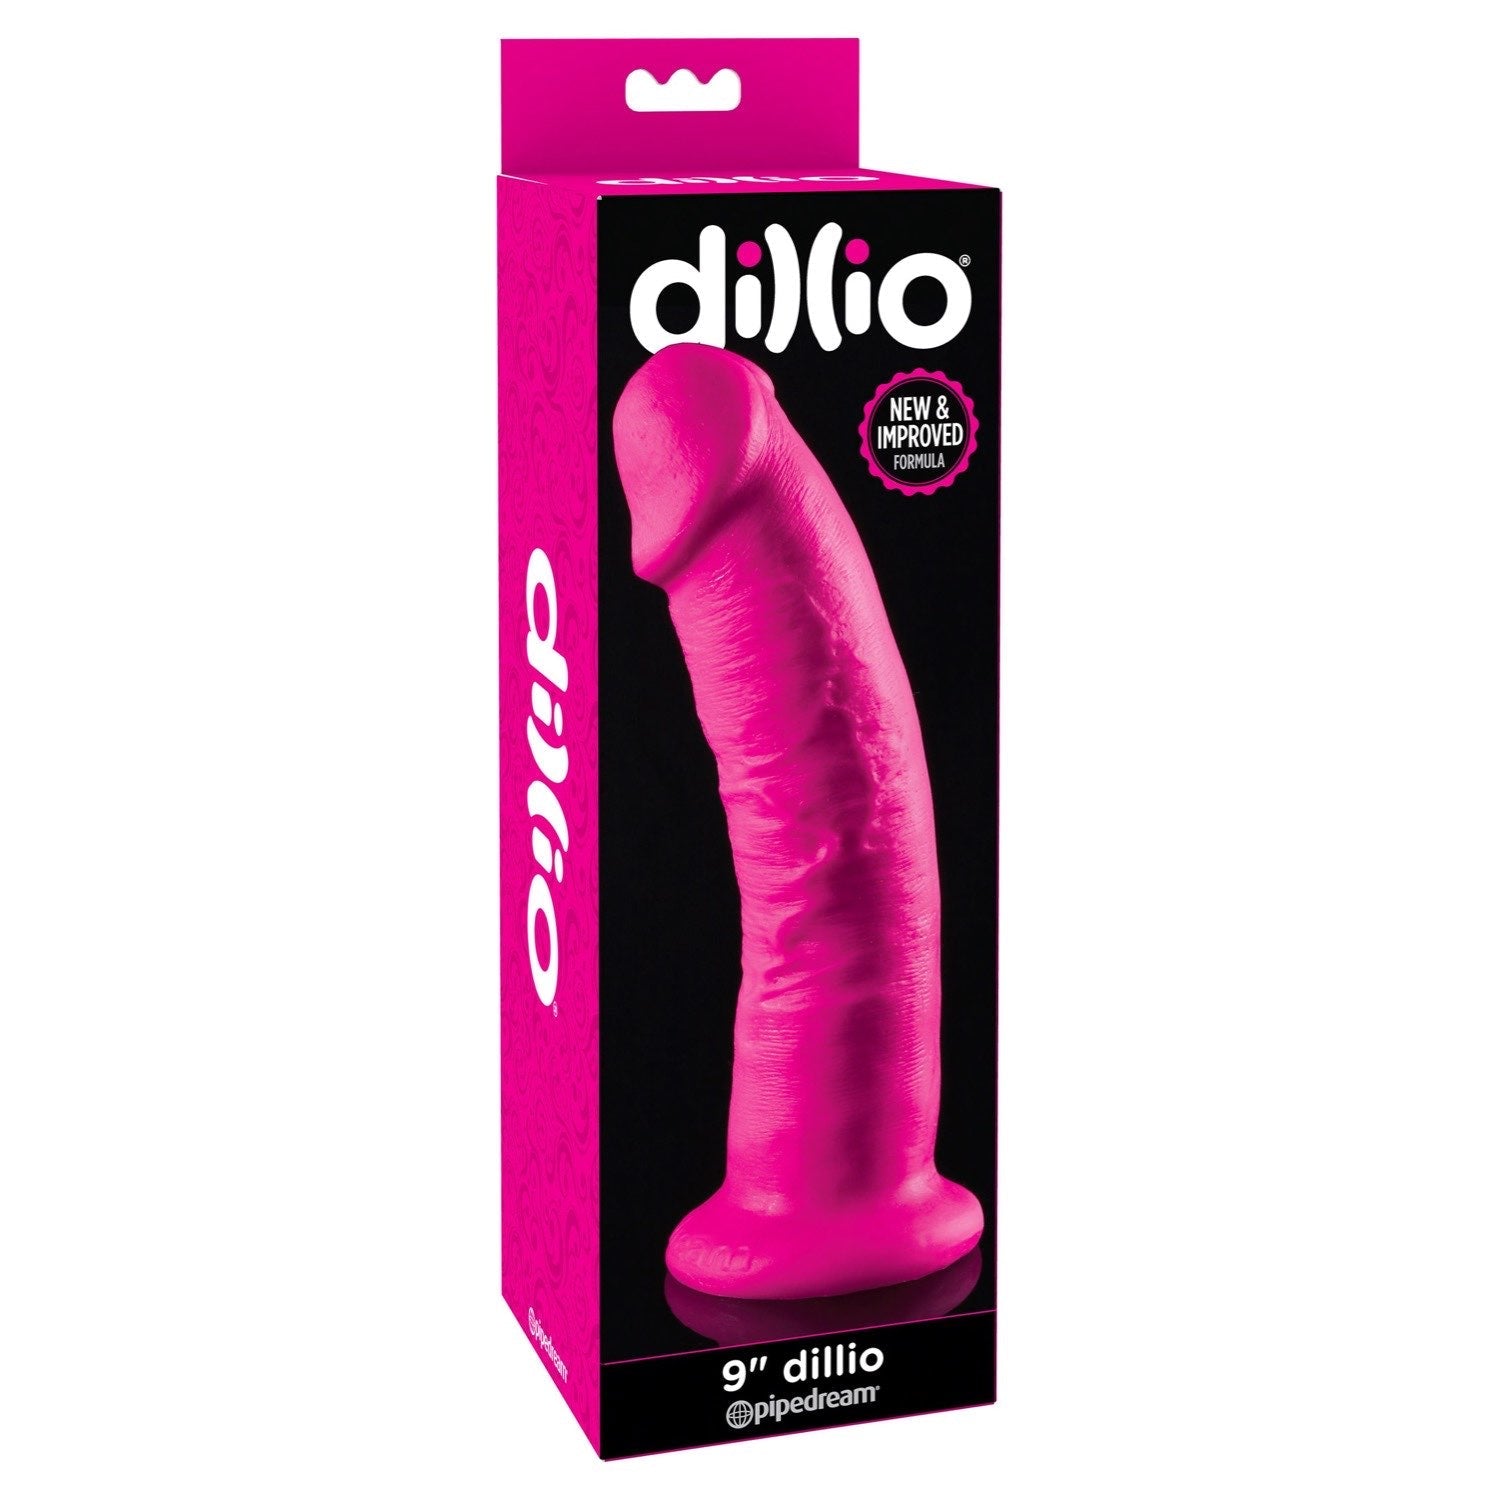 Dillio 9&quot; Dildo - Pink 22.9 cm Dong by Pipedream